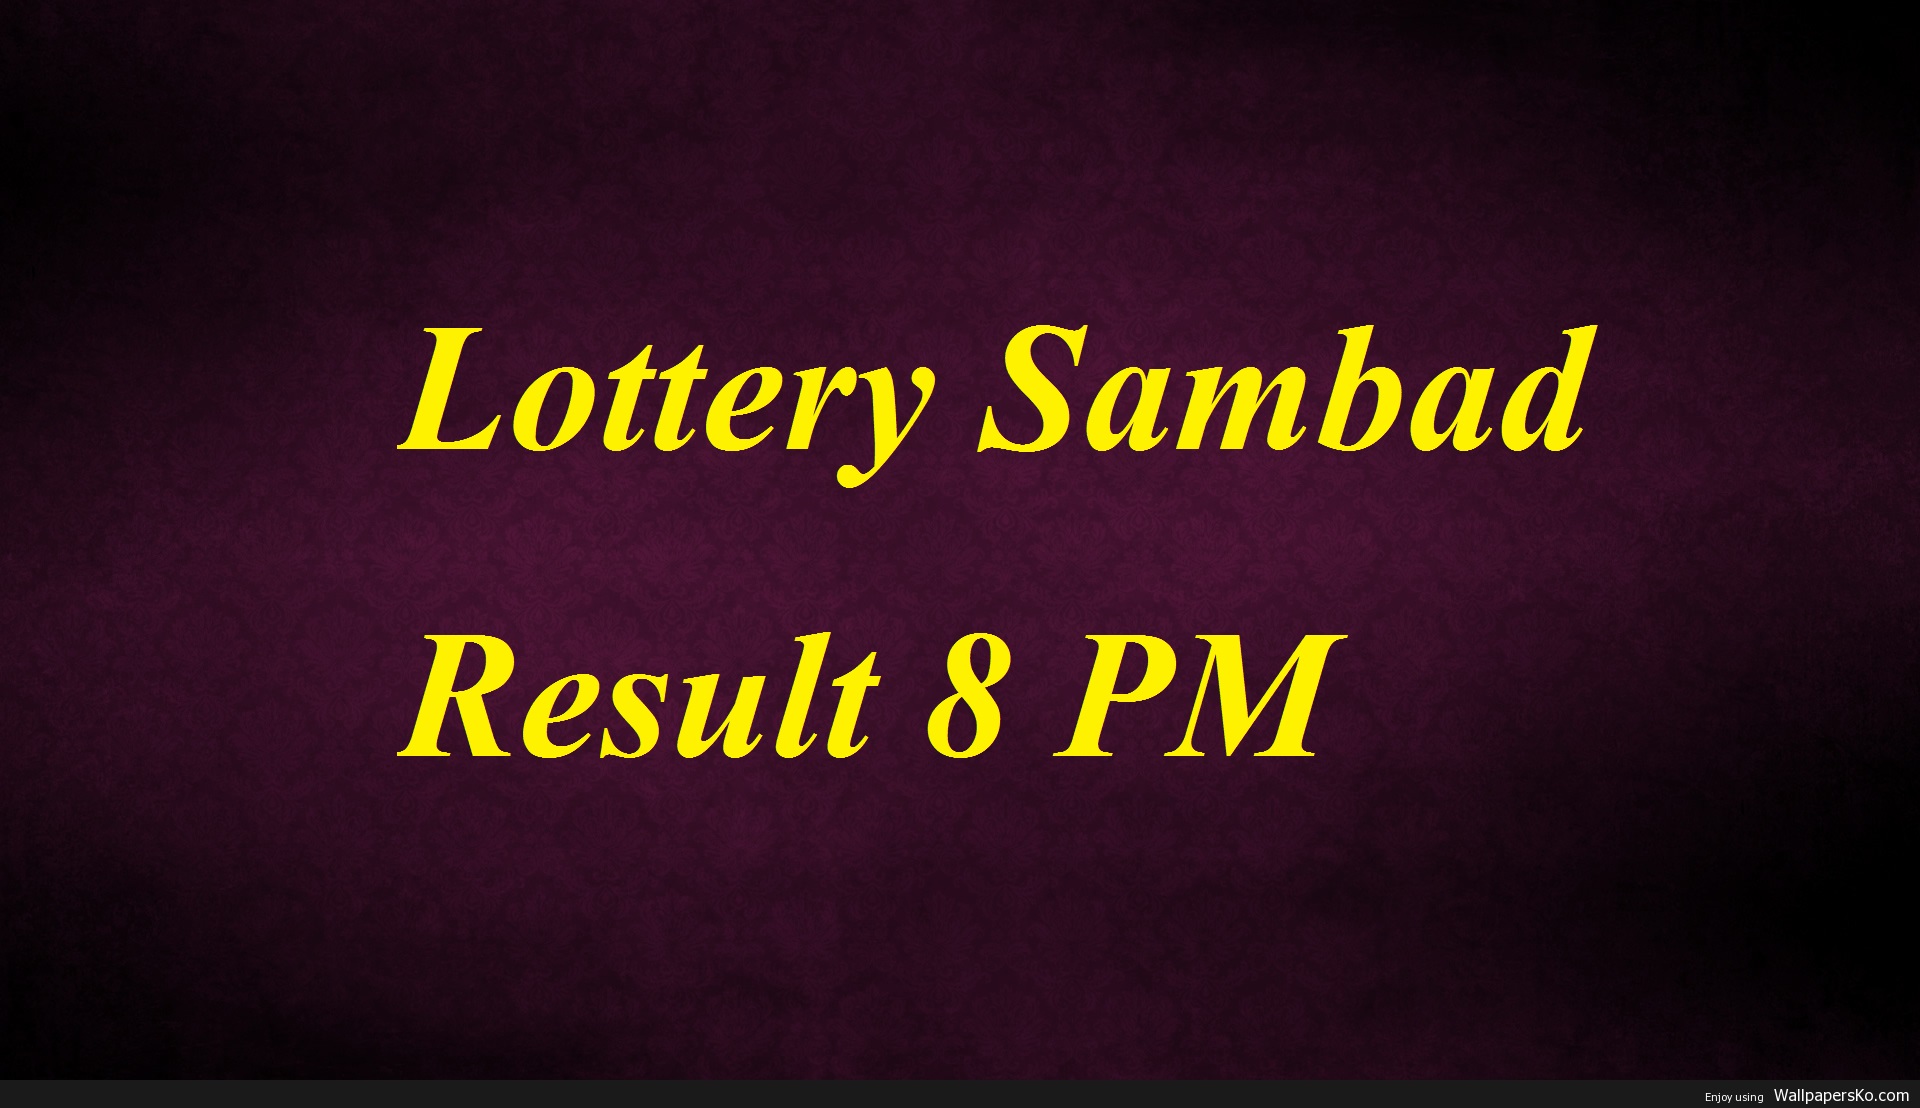 lottery sambad 8 pm result today